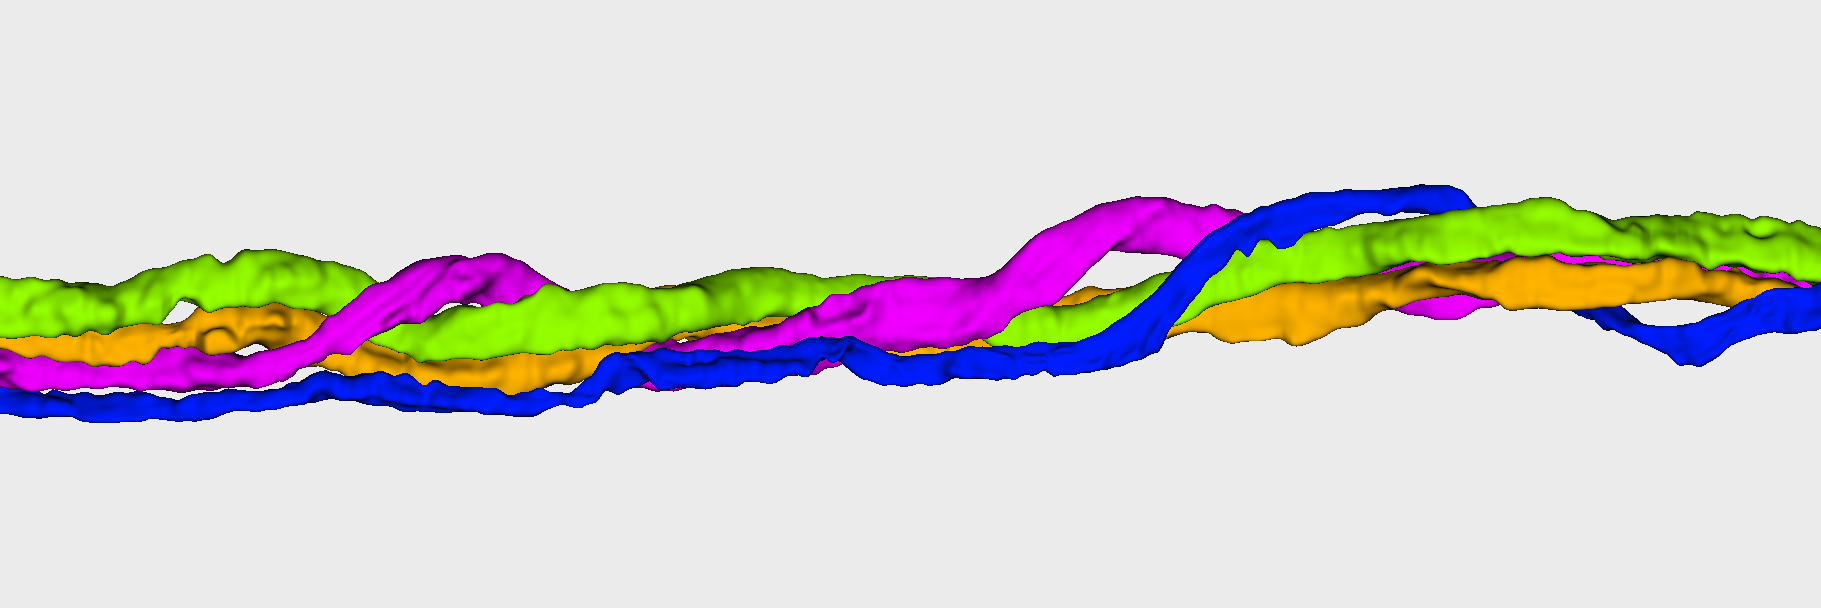 Analysing nerves in 3D